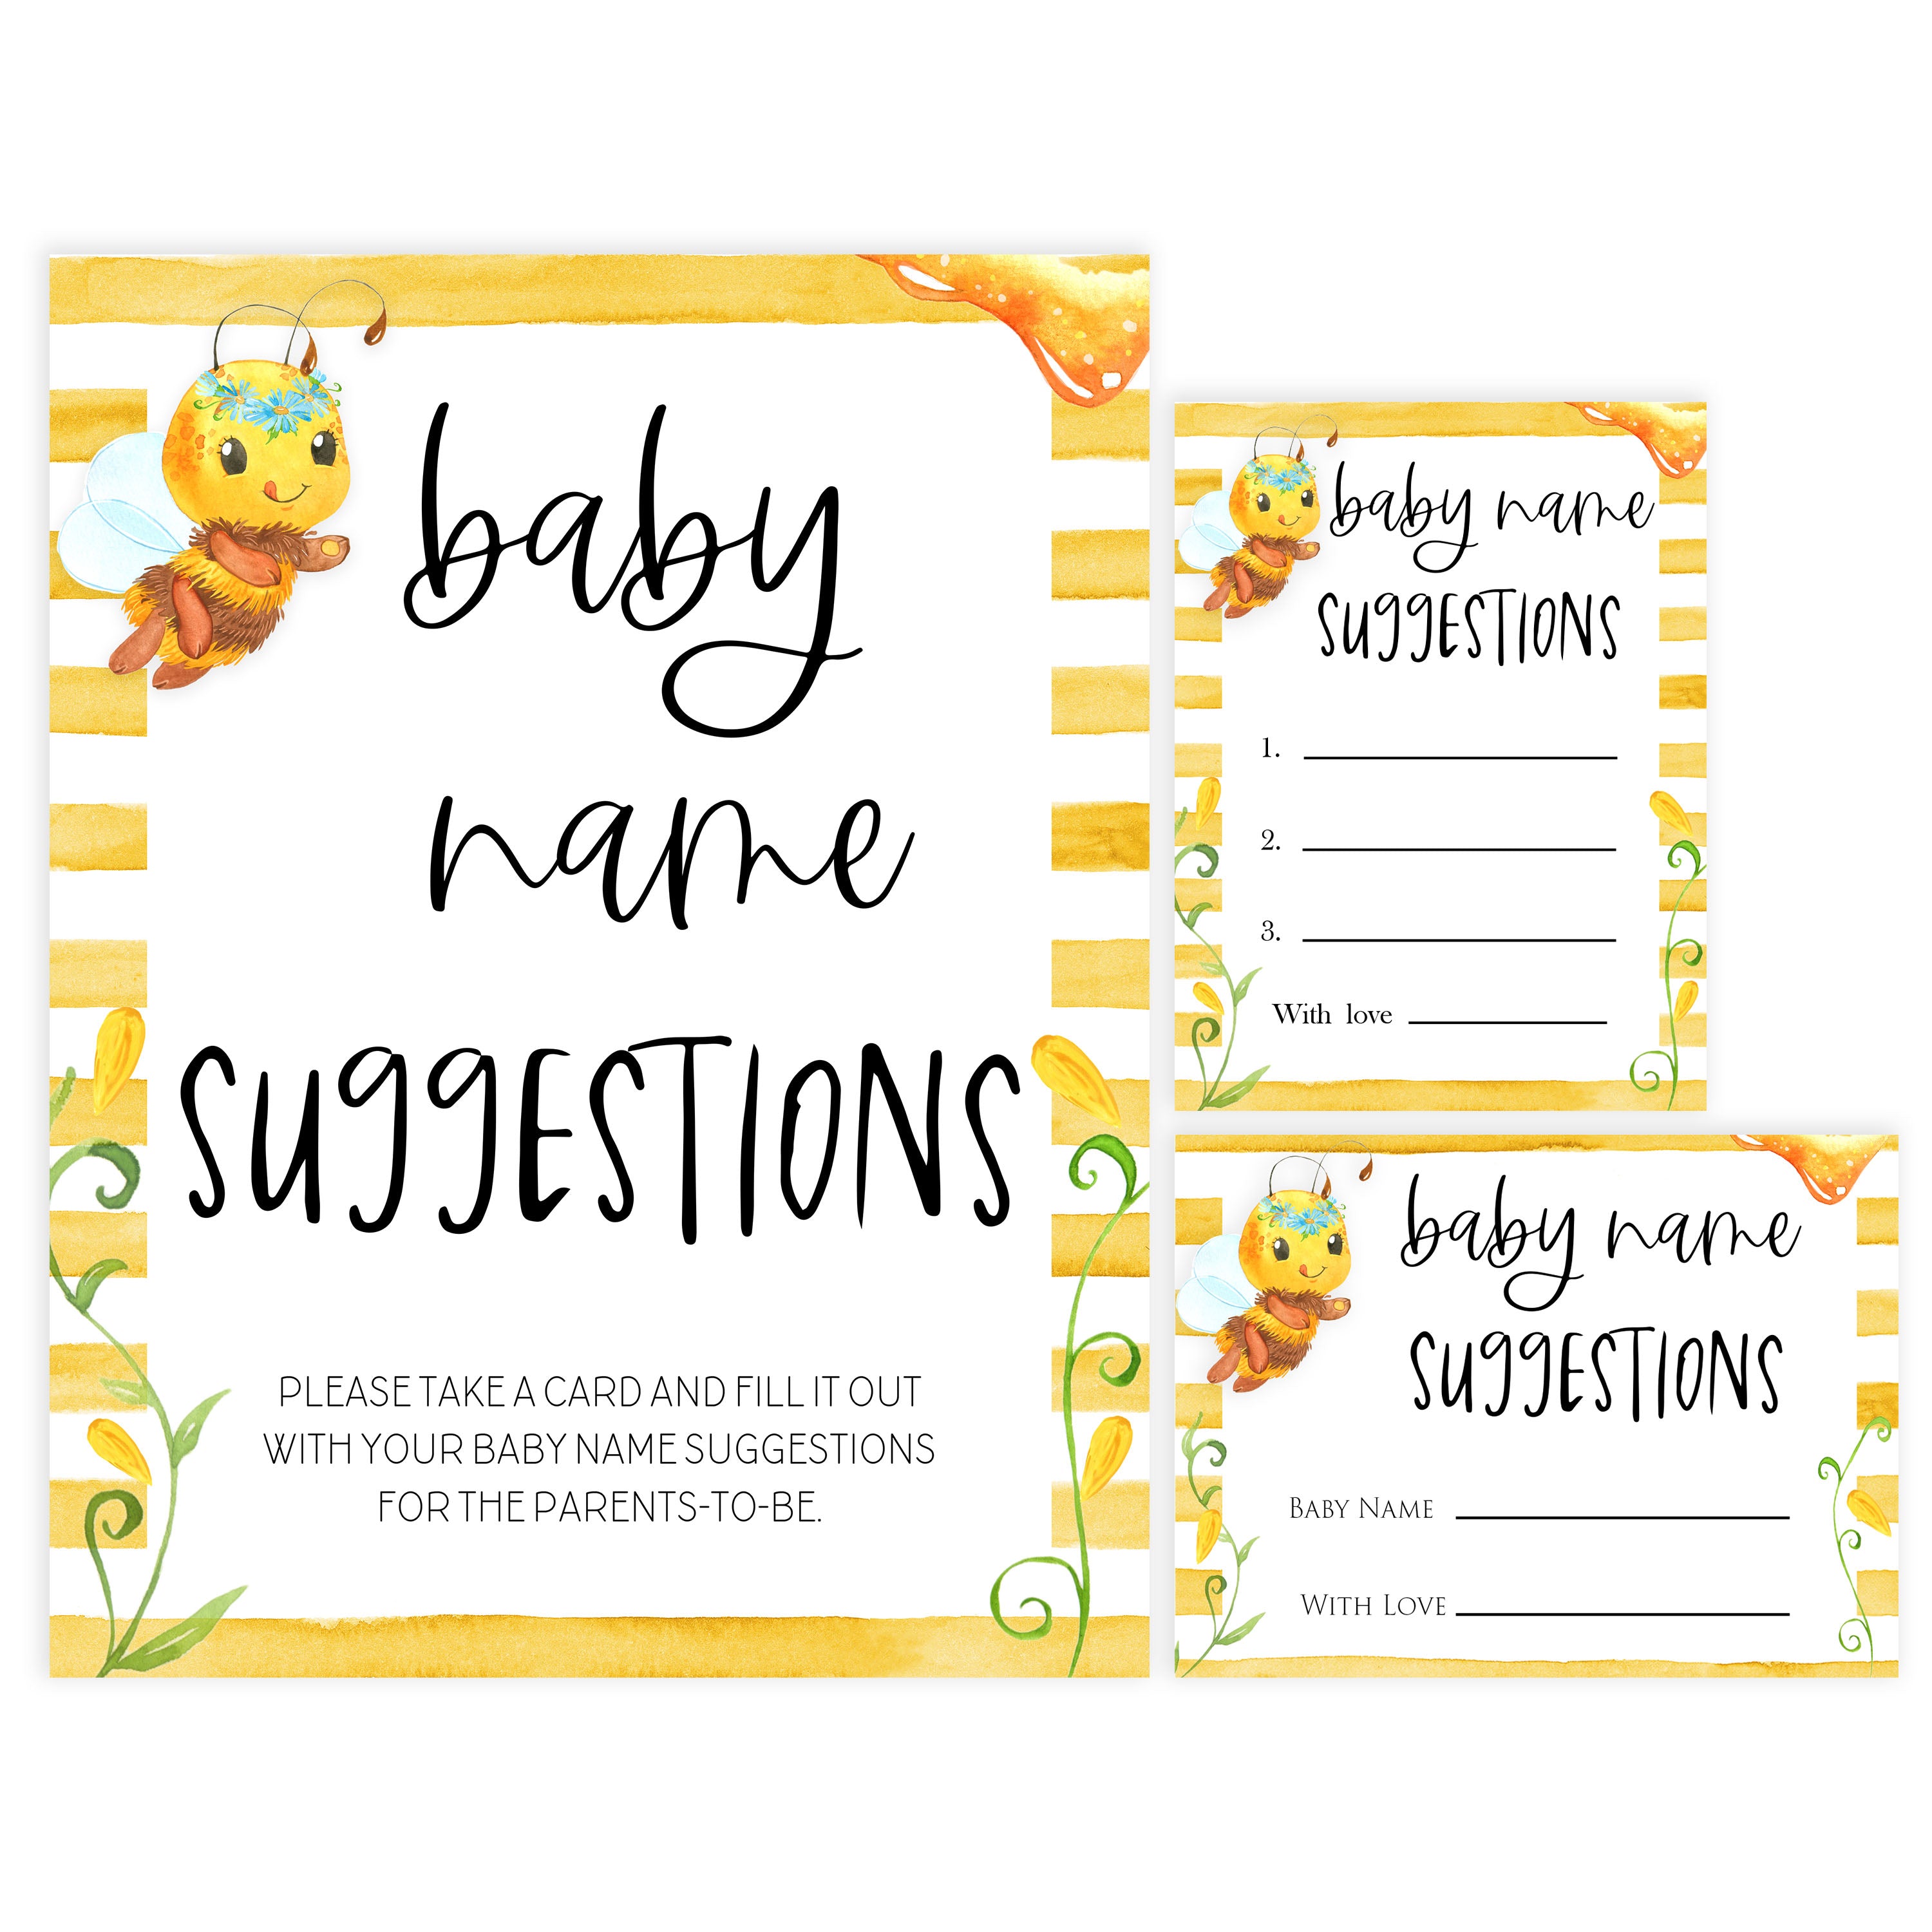 baby name suggestions game, Printable baby shower games, mommy bee fun baby games, baby shower games, fun baby shower ideas, top baby shower ideas, mommy to bee baby shower, friends baby shower ideas